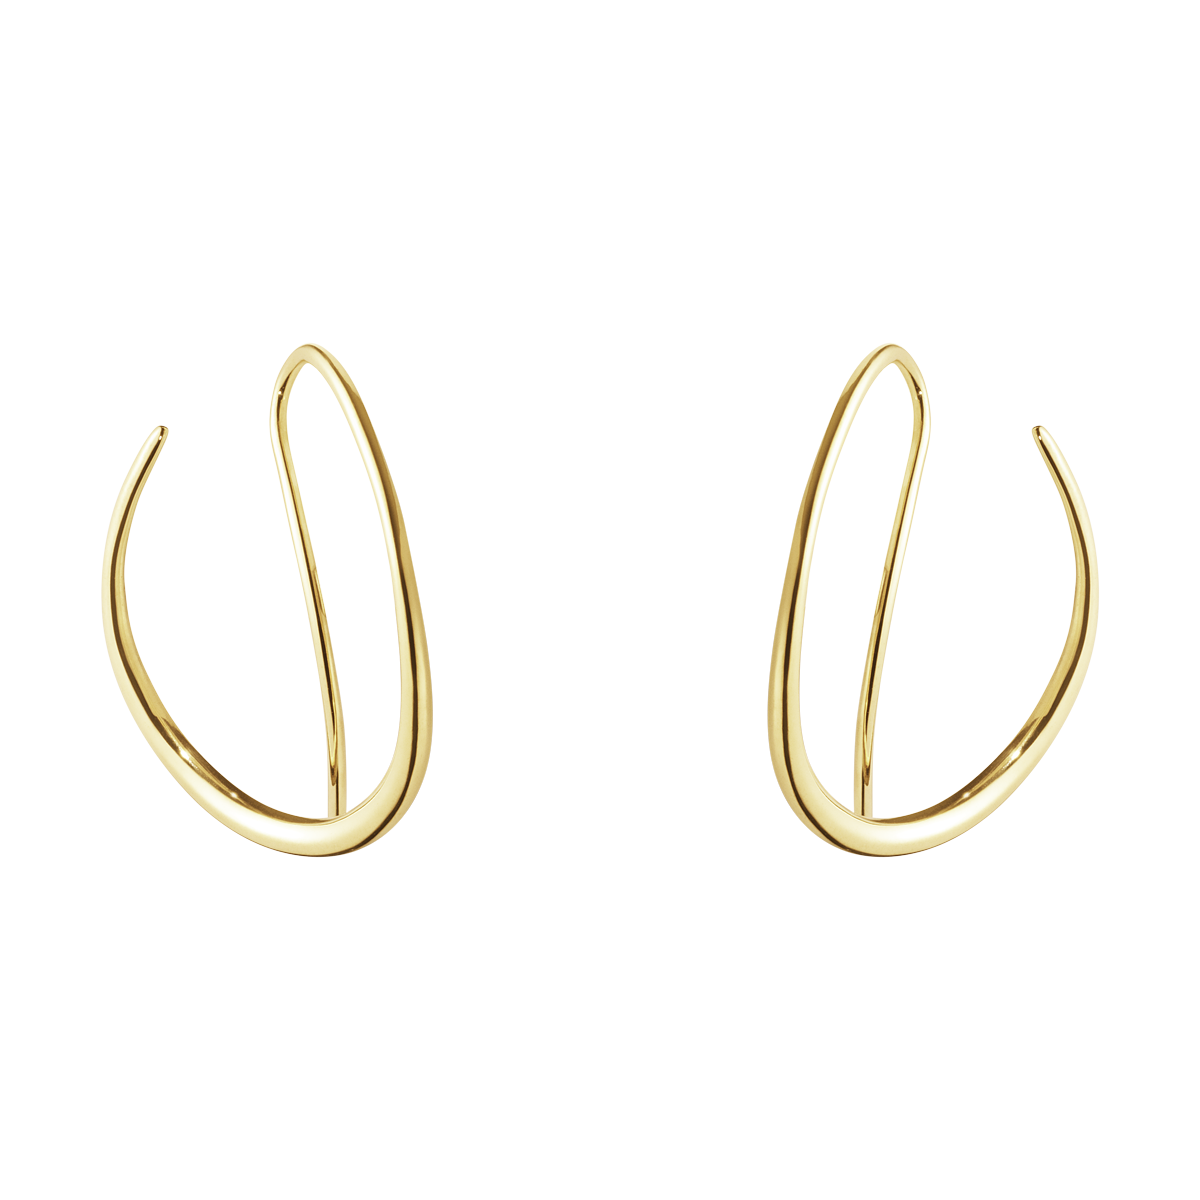 OFFSPRING earhoop, contemporary but classic gold hoop earring